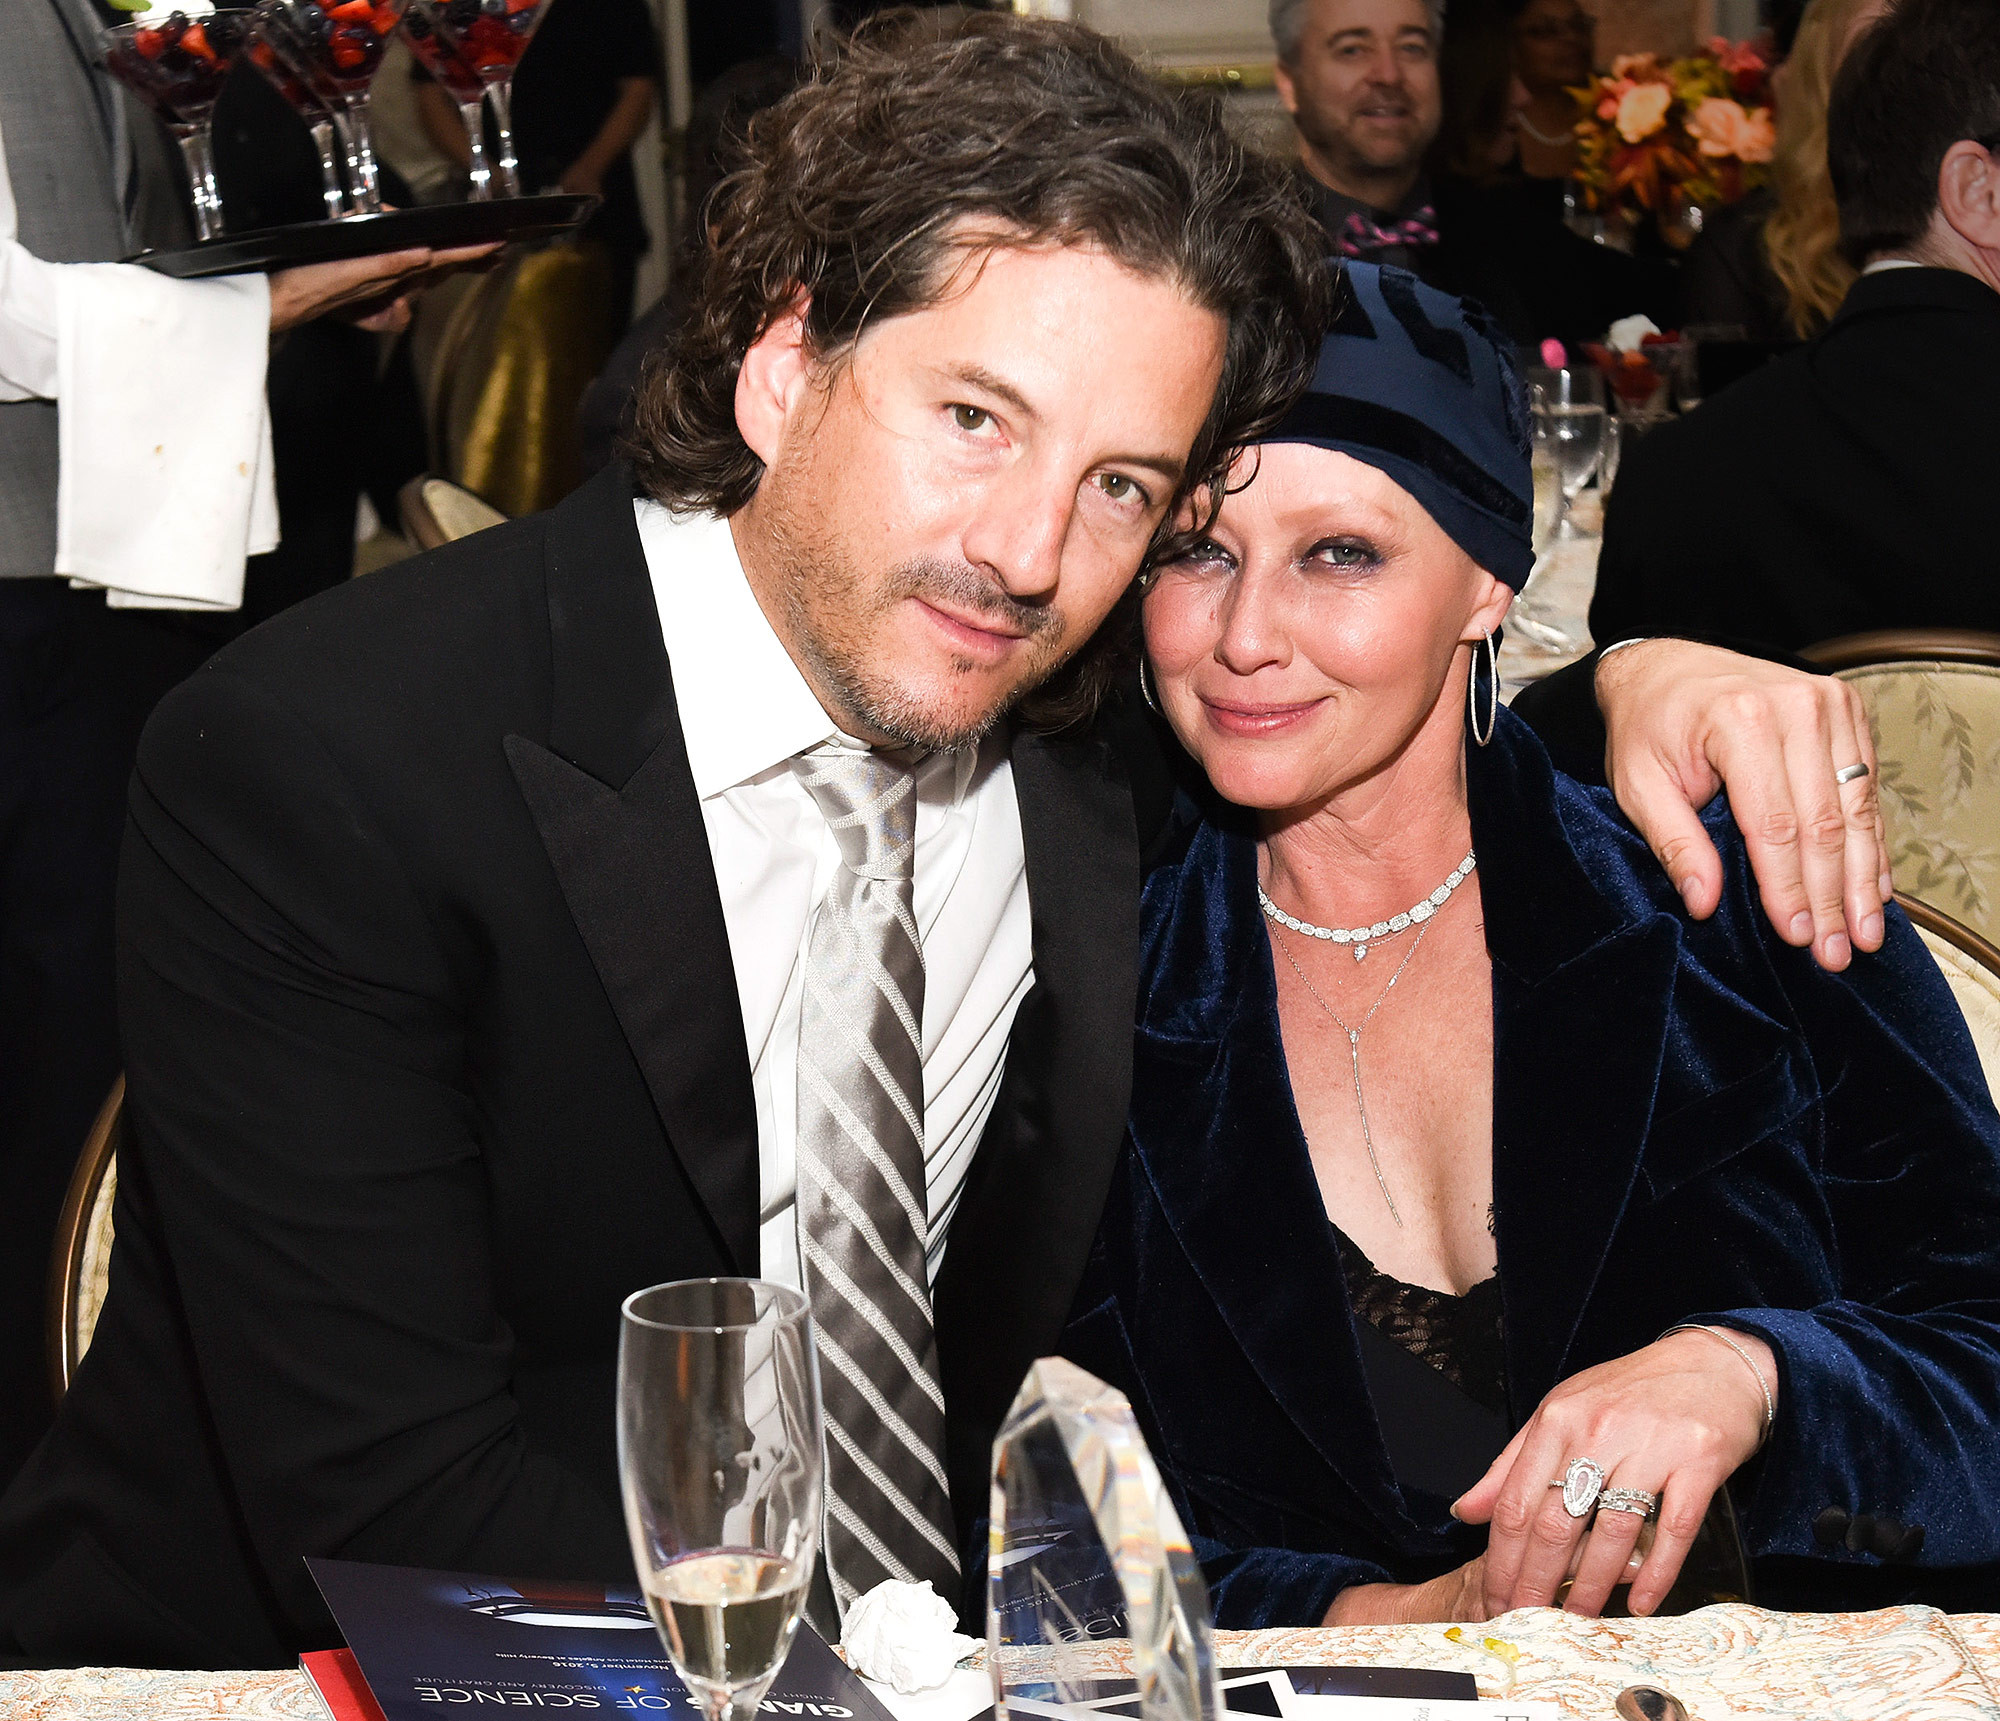 Shannen Doherty and husband in 2016, as Doherty was undergoing cancer treatment